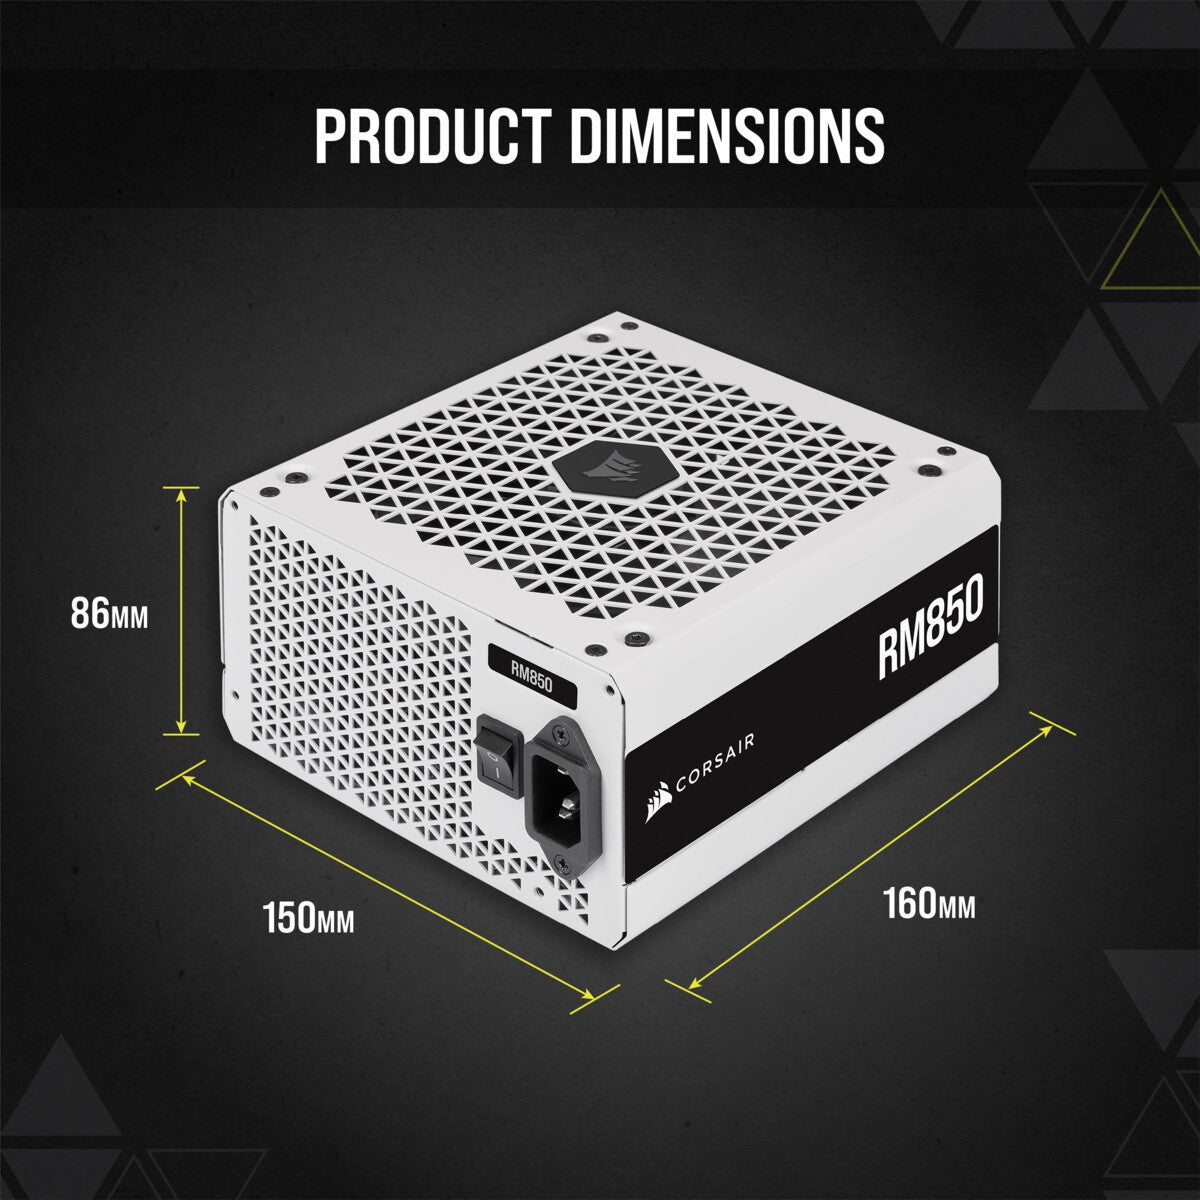 Corsair RM850 - 850W 80+ Gold Fully Modular Power Supply Unit in White